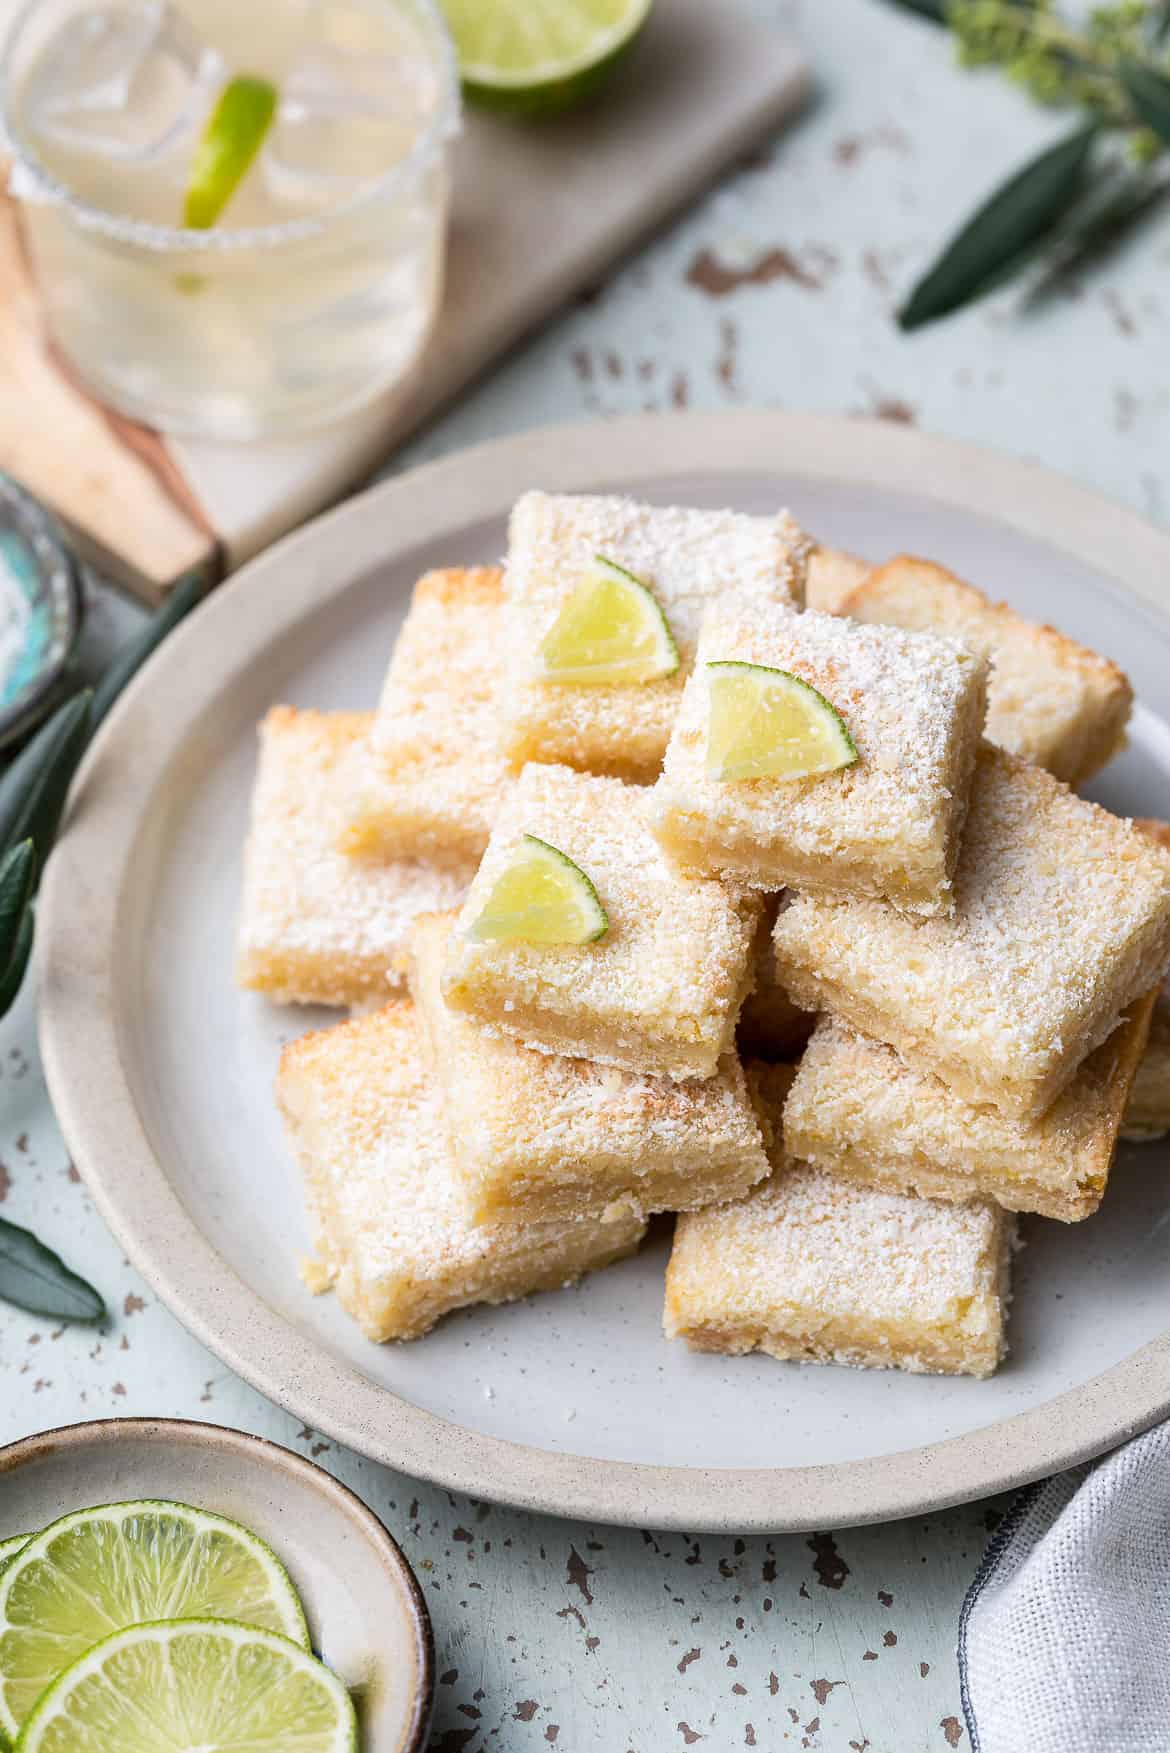 A stack of margarita bars dusted with powdered sugar on a white plate.